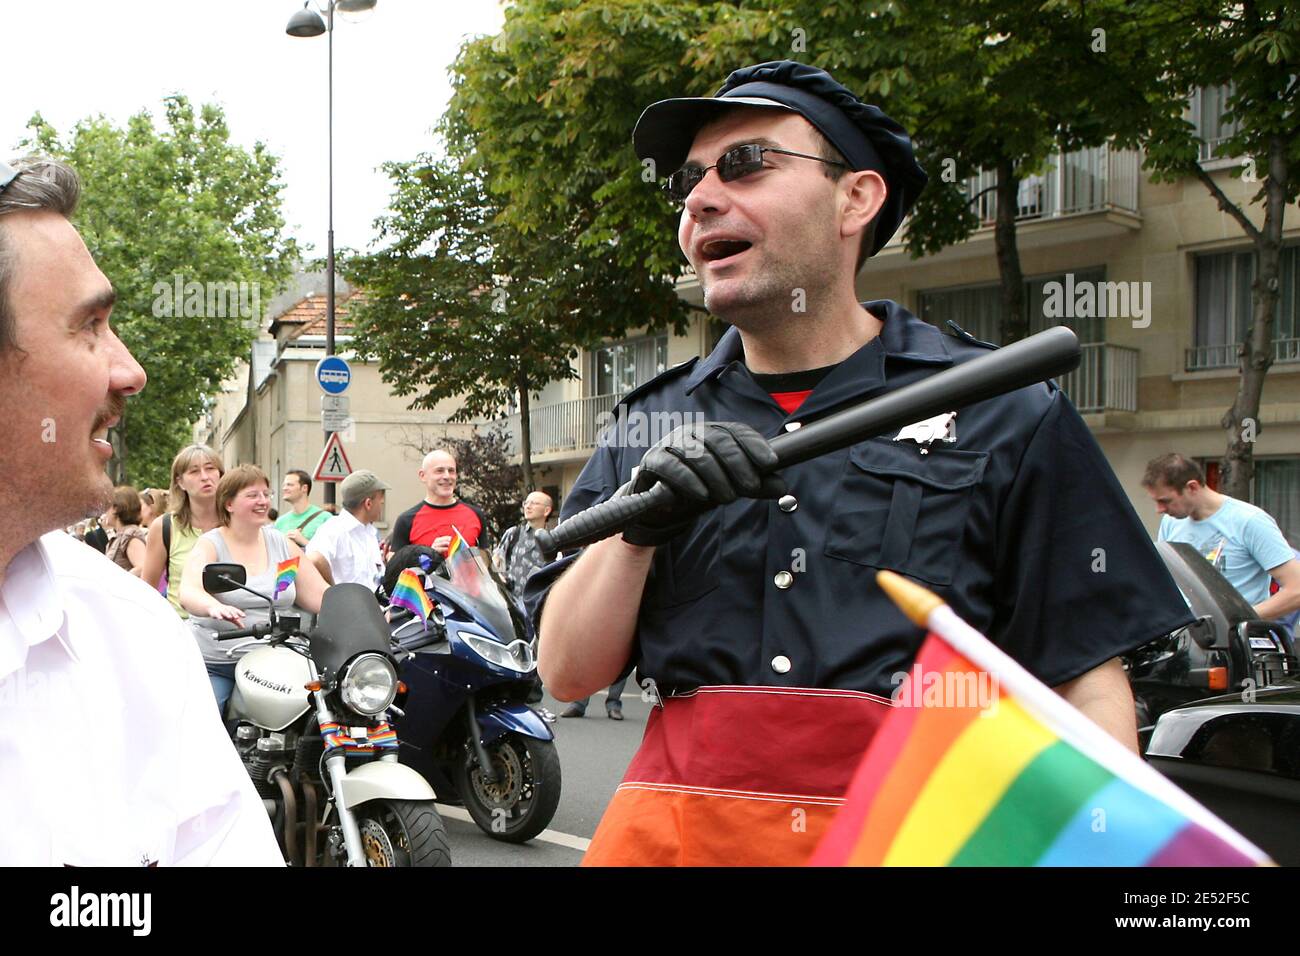 Thousands of people take part in the Gay Pride parade where gays, lesbians and transvestites demonstrate for equal rights and against discrimination, in Paris, France, on June 28, 2008. Photo by Stephane Gilles/ABACAPRESS.COM Stock Photo